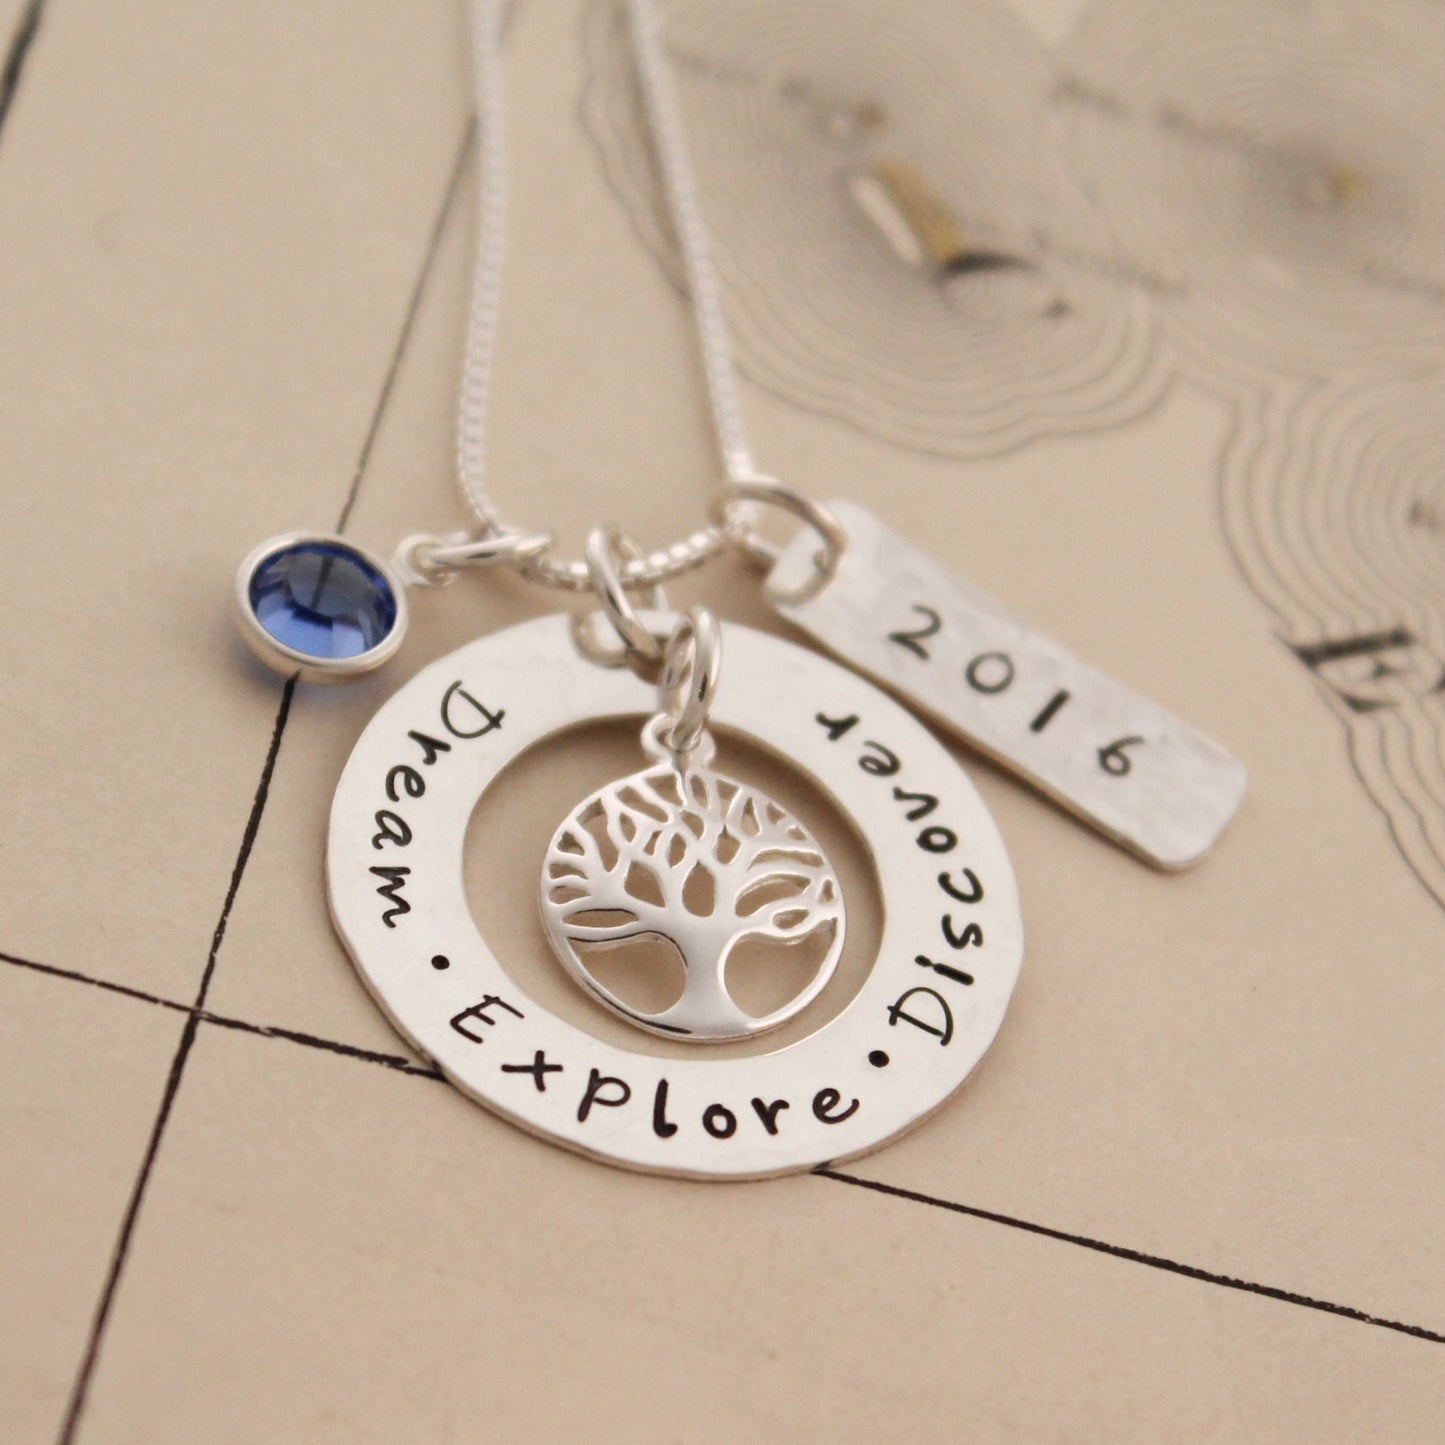 Dream Explore Discover Necklace, Personalized Graduation Jewelry, Graduation Gift, Hand Stamped Necklace, Personalized Jewelry, Tree Jewelry